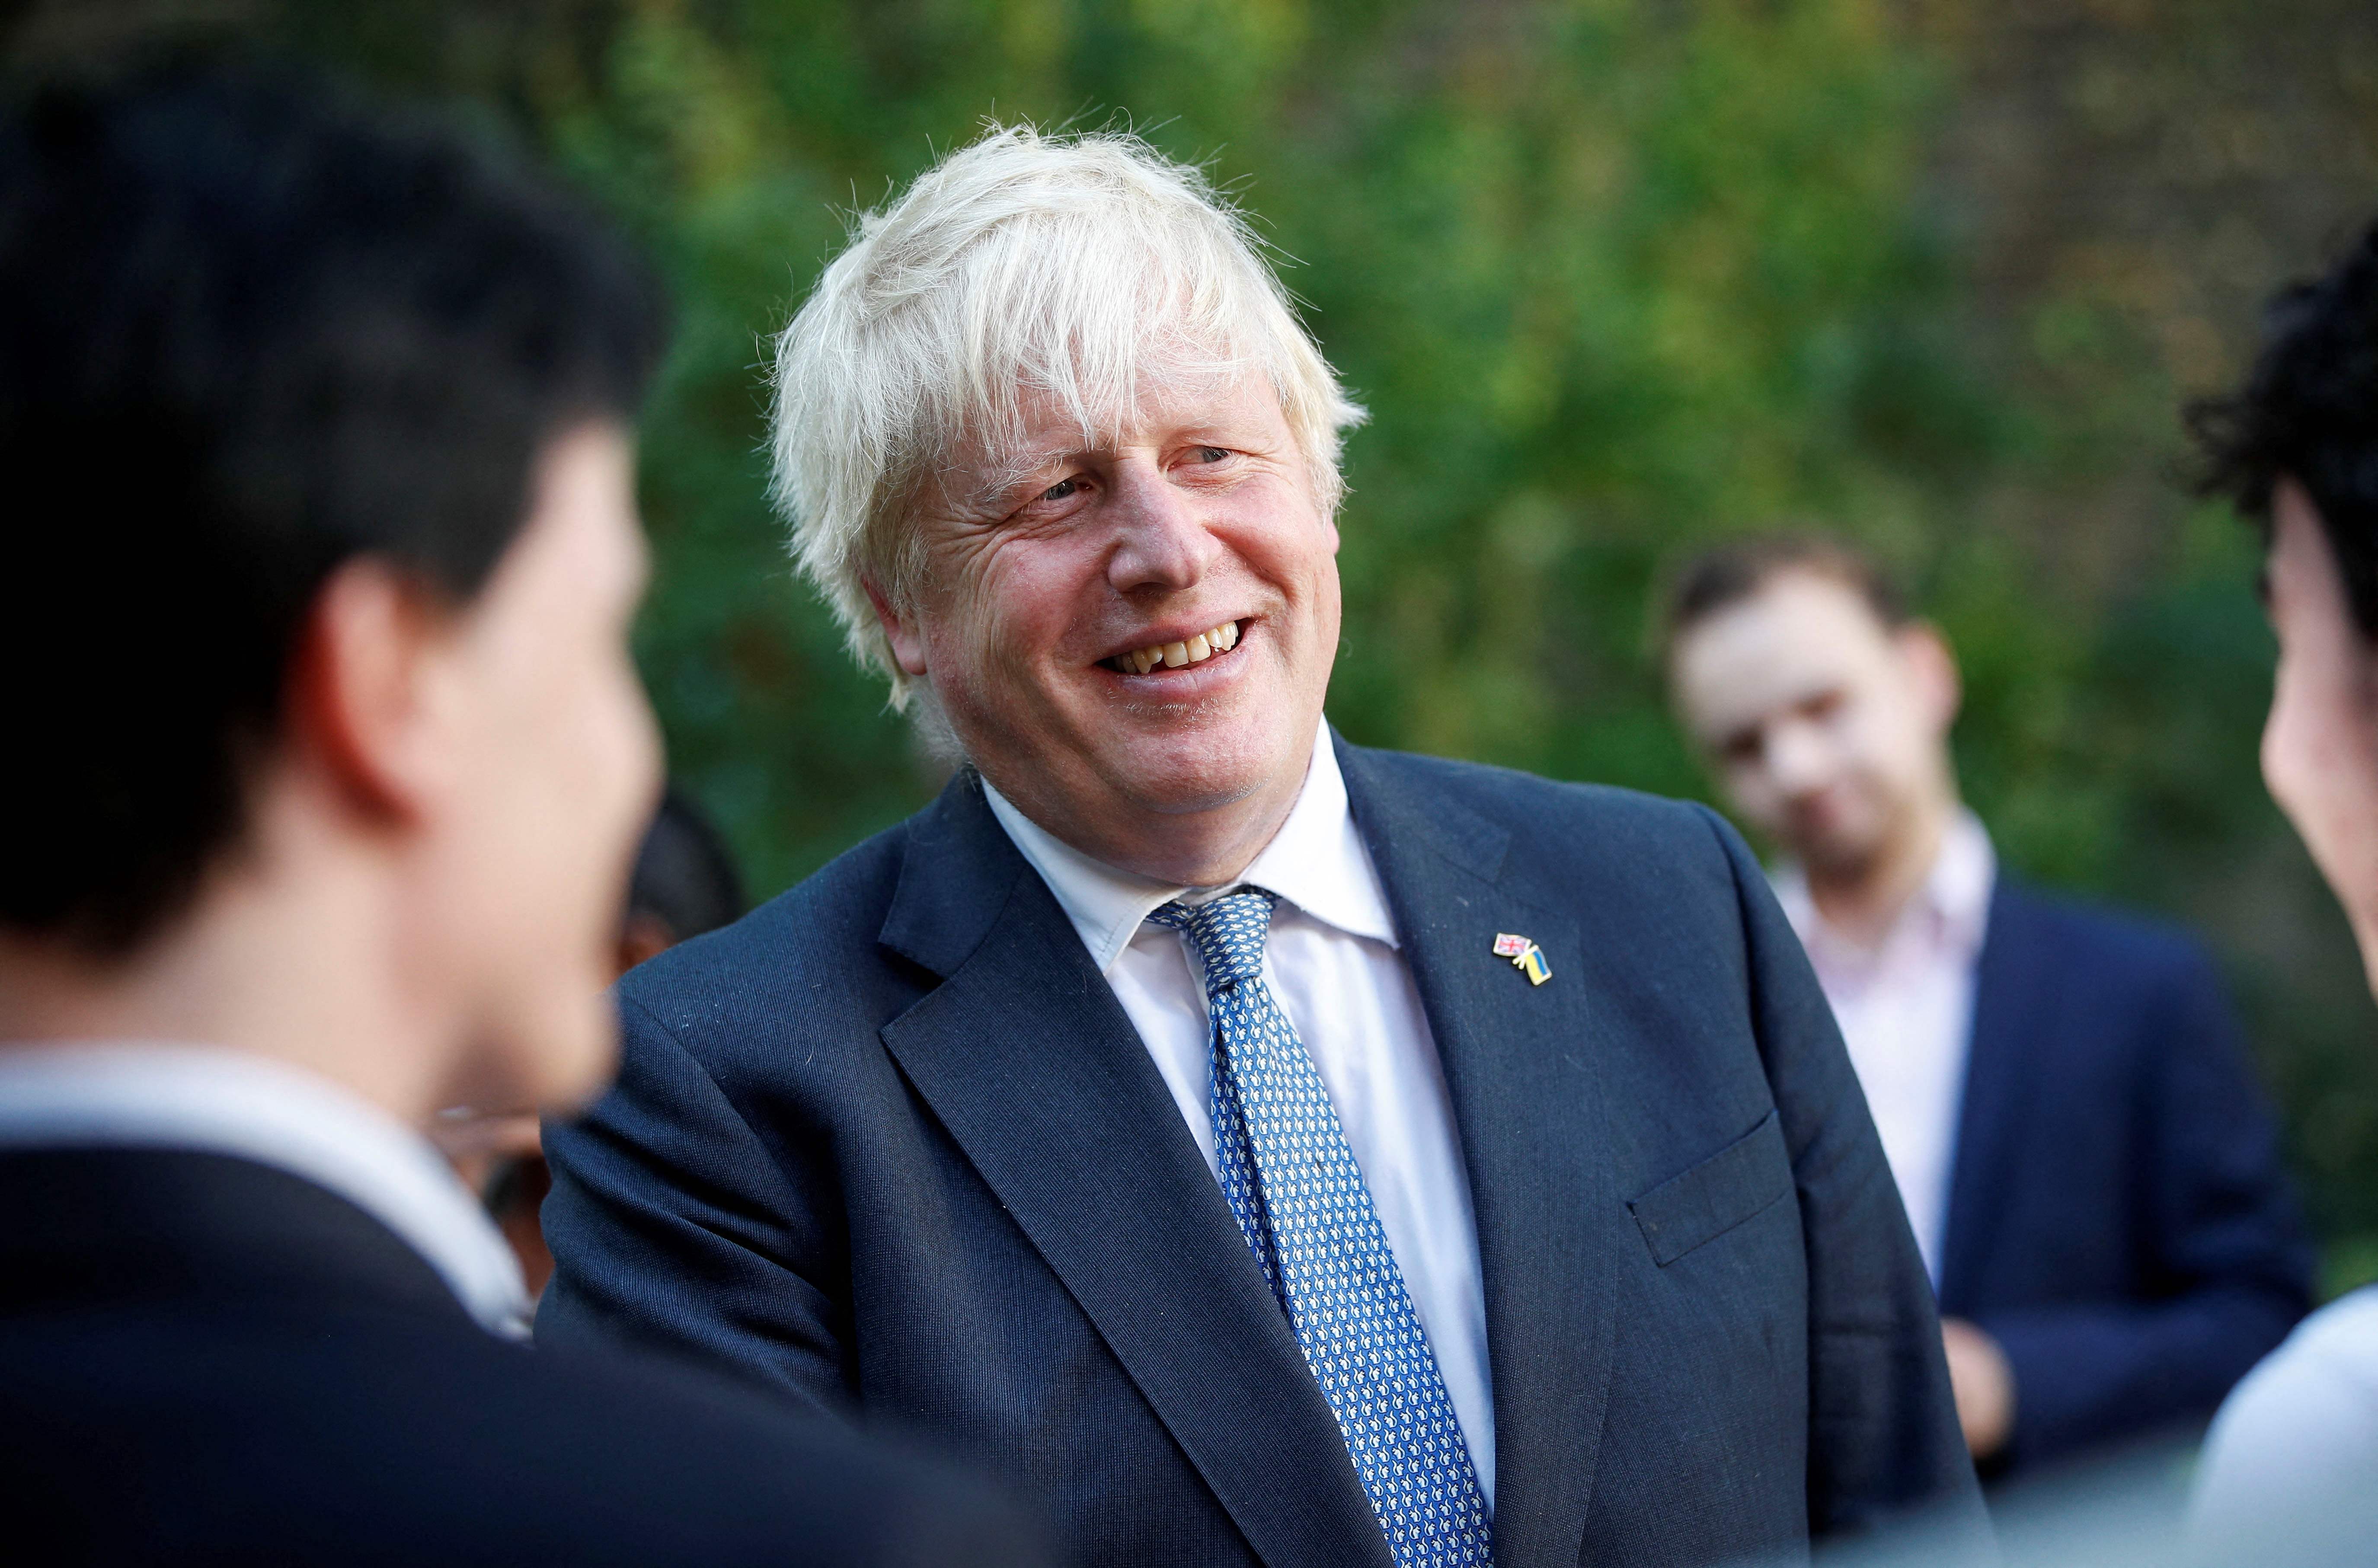 Boris Johnson was known for gaffes before he became prime minister - and they just kept coming